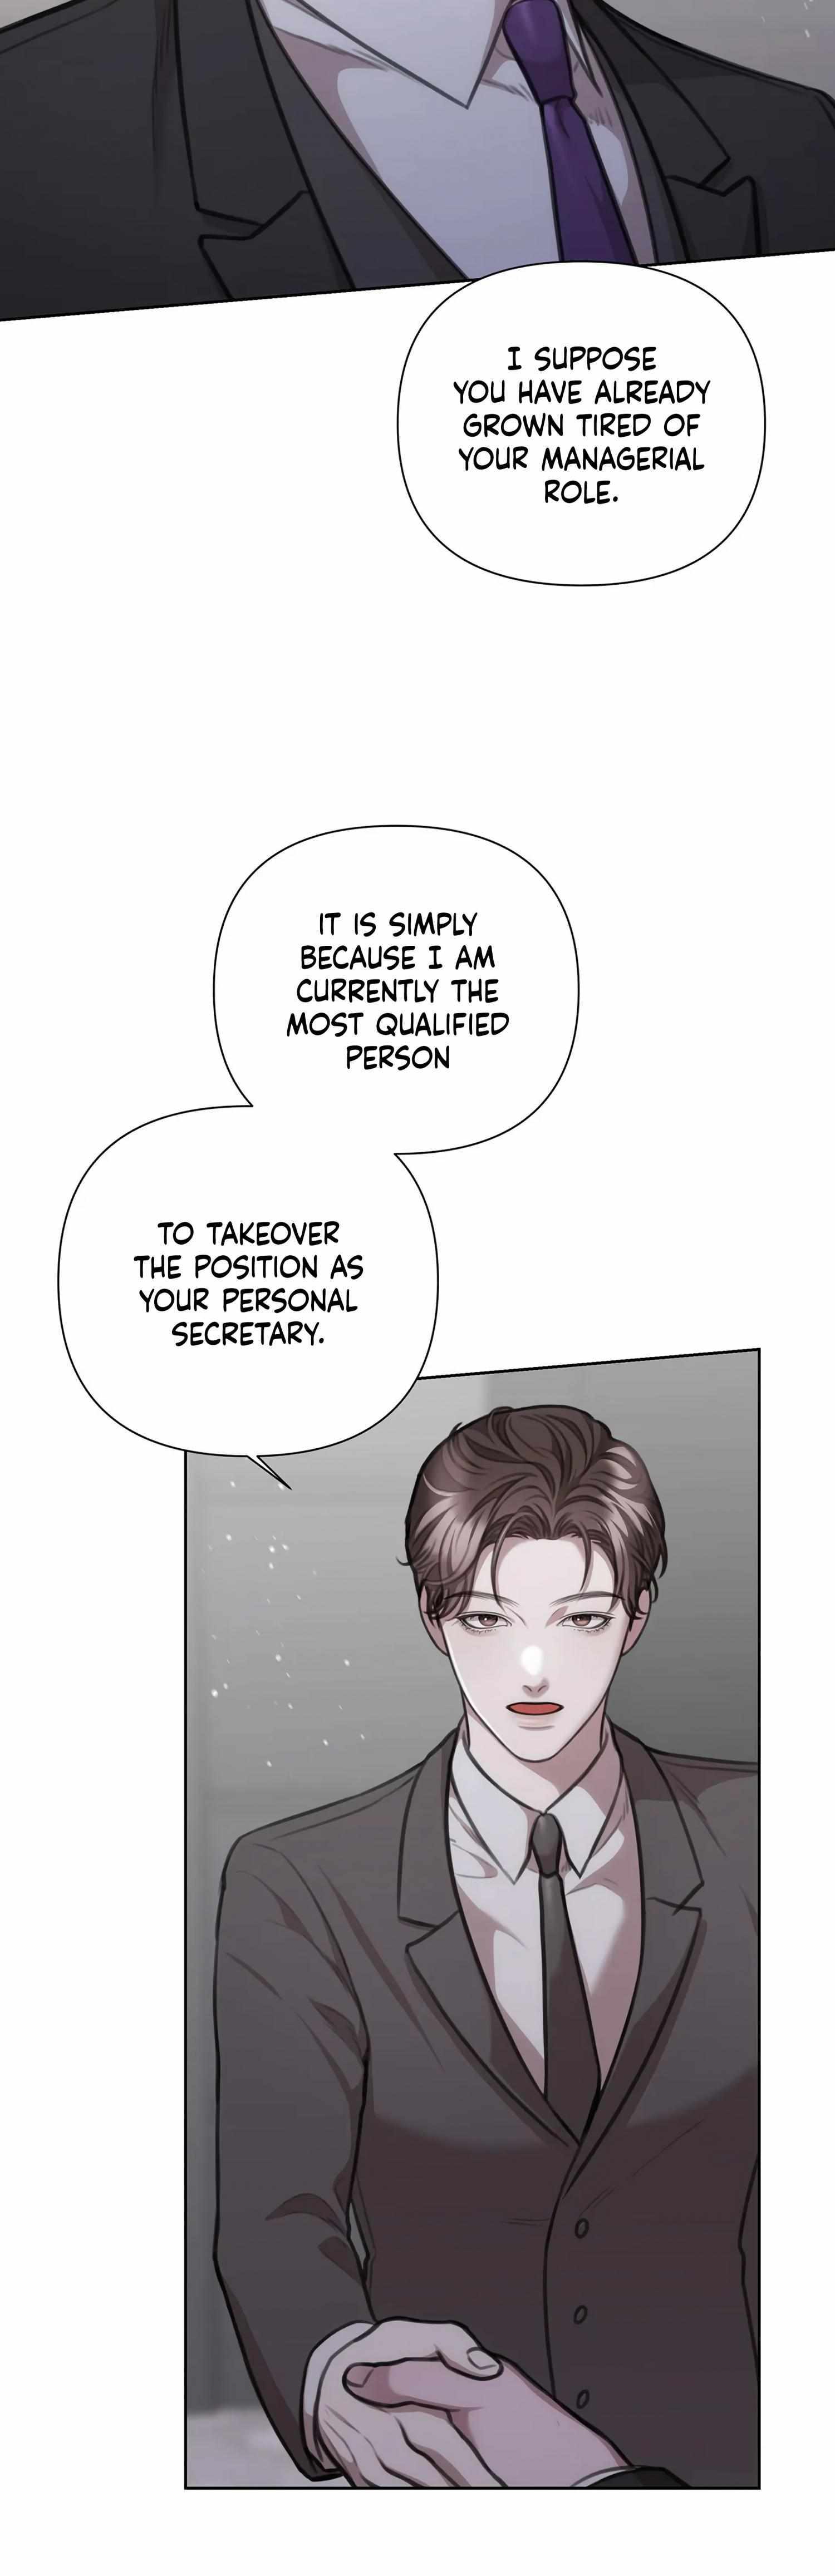 Secretary Jin's Confinement Diary Chapter 23